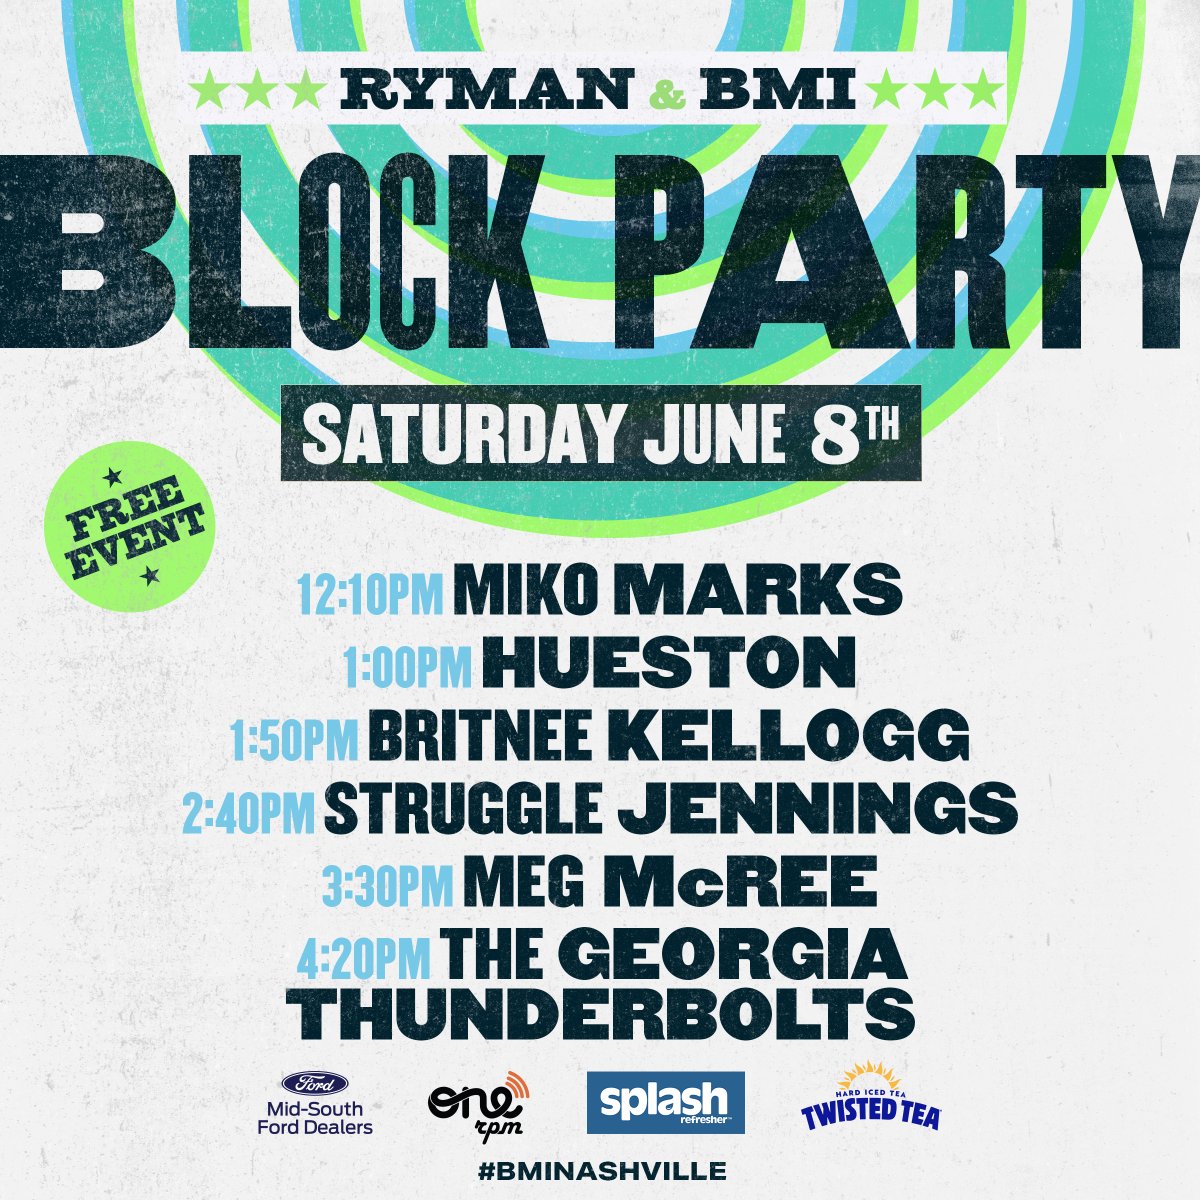 Nothin’ like a good ole block party! Come out and celebrate CMA Fest with us at the @bmi and @theryman free concert series at the PNC Plaza Stage! I’ll be playing some songs on Saturday, 6/8 at 3:30pm. See y’all soon! 🤠🌼